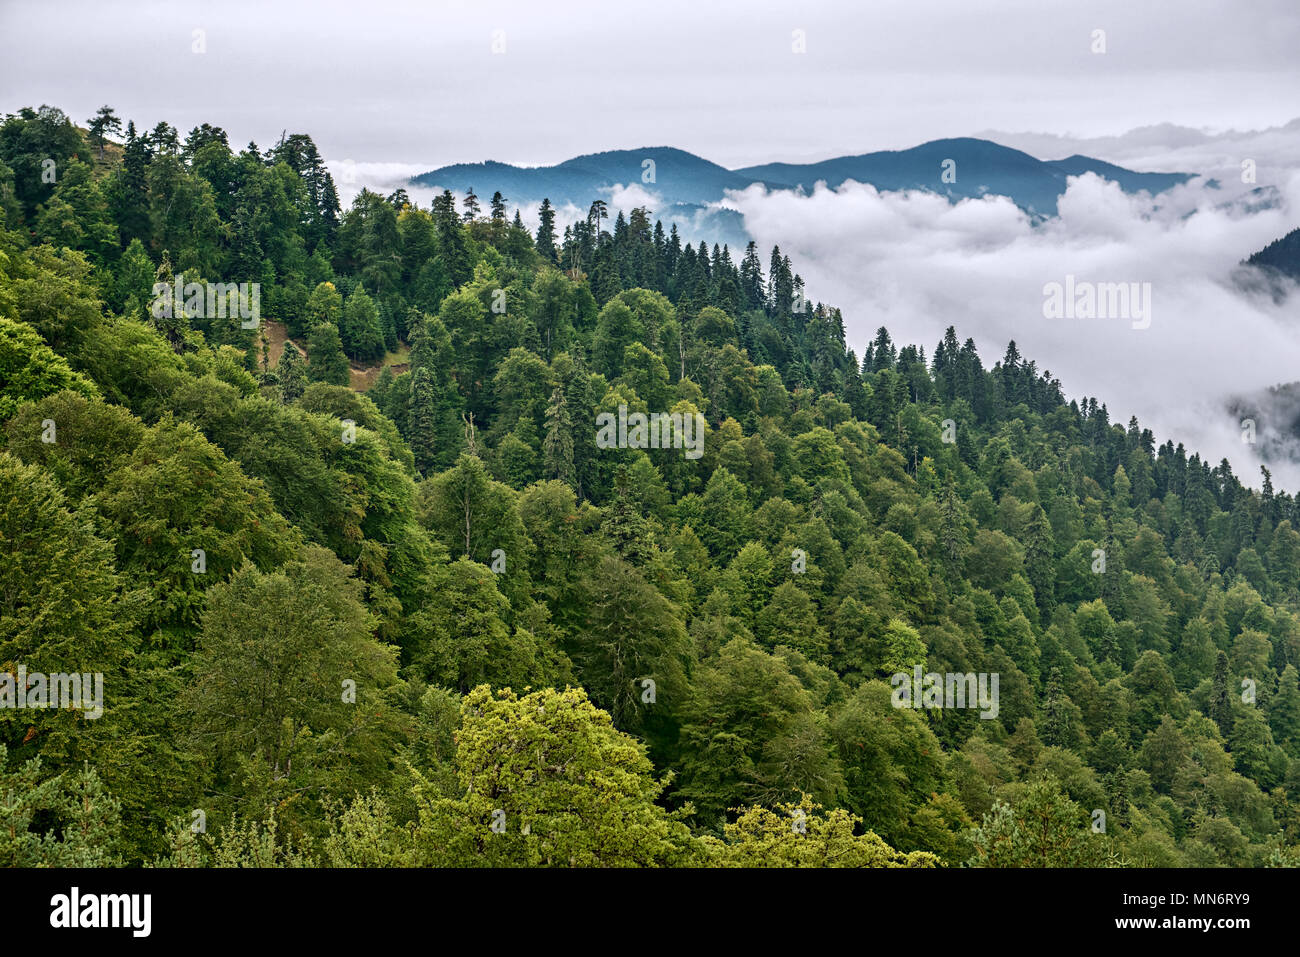 Mountain landscape with cloudy sky, Turkey Stock Photo